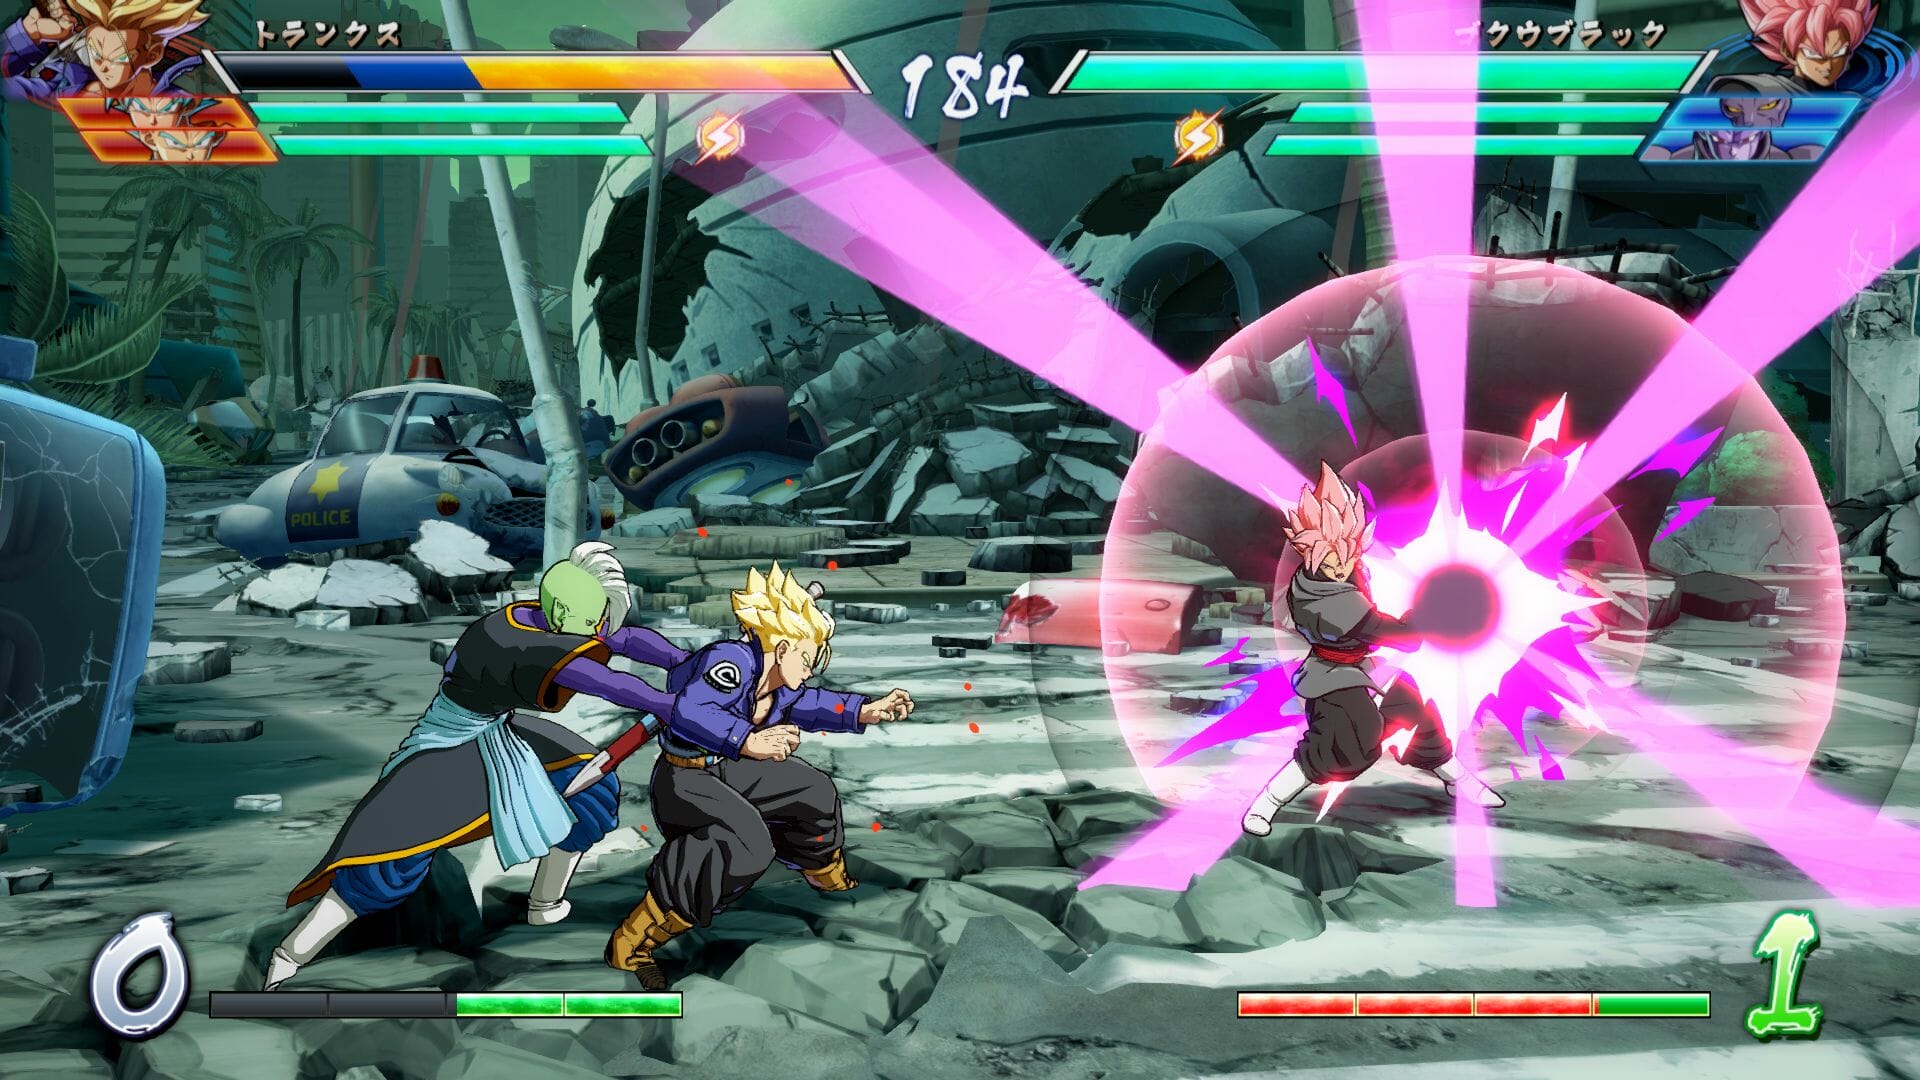 dragon ball z fighting game download pc